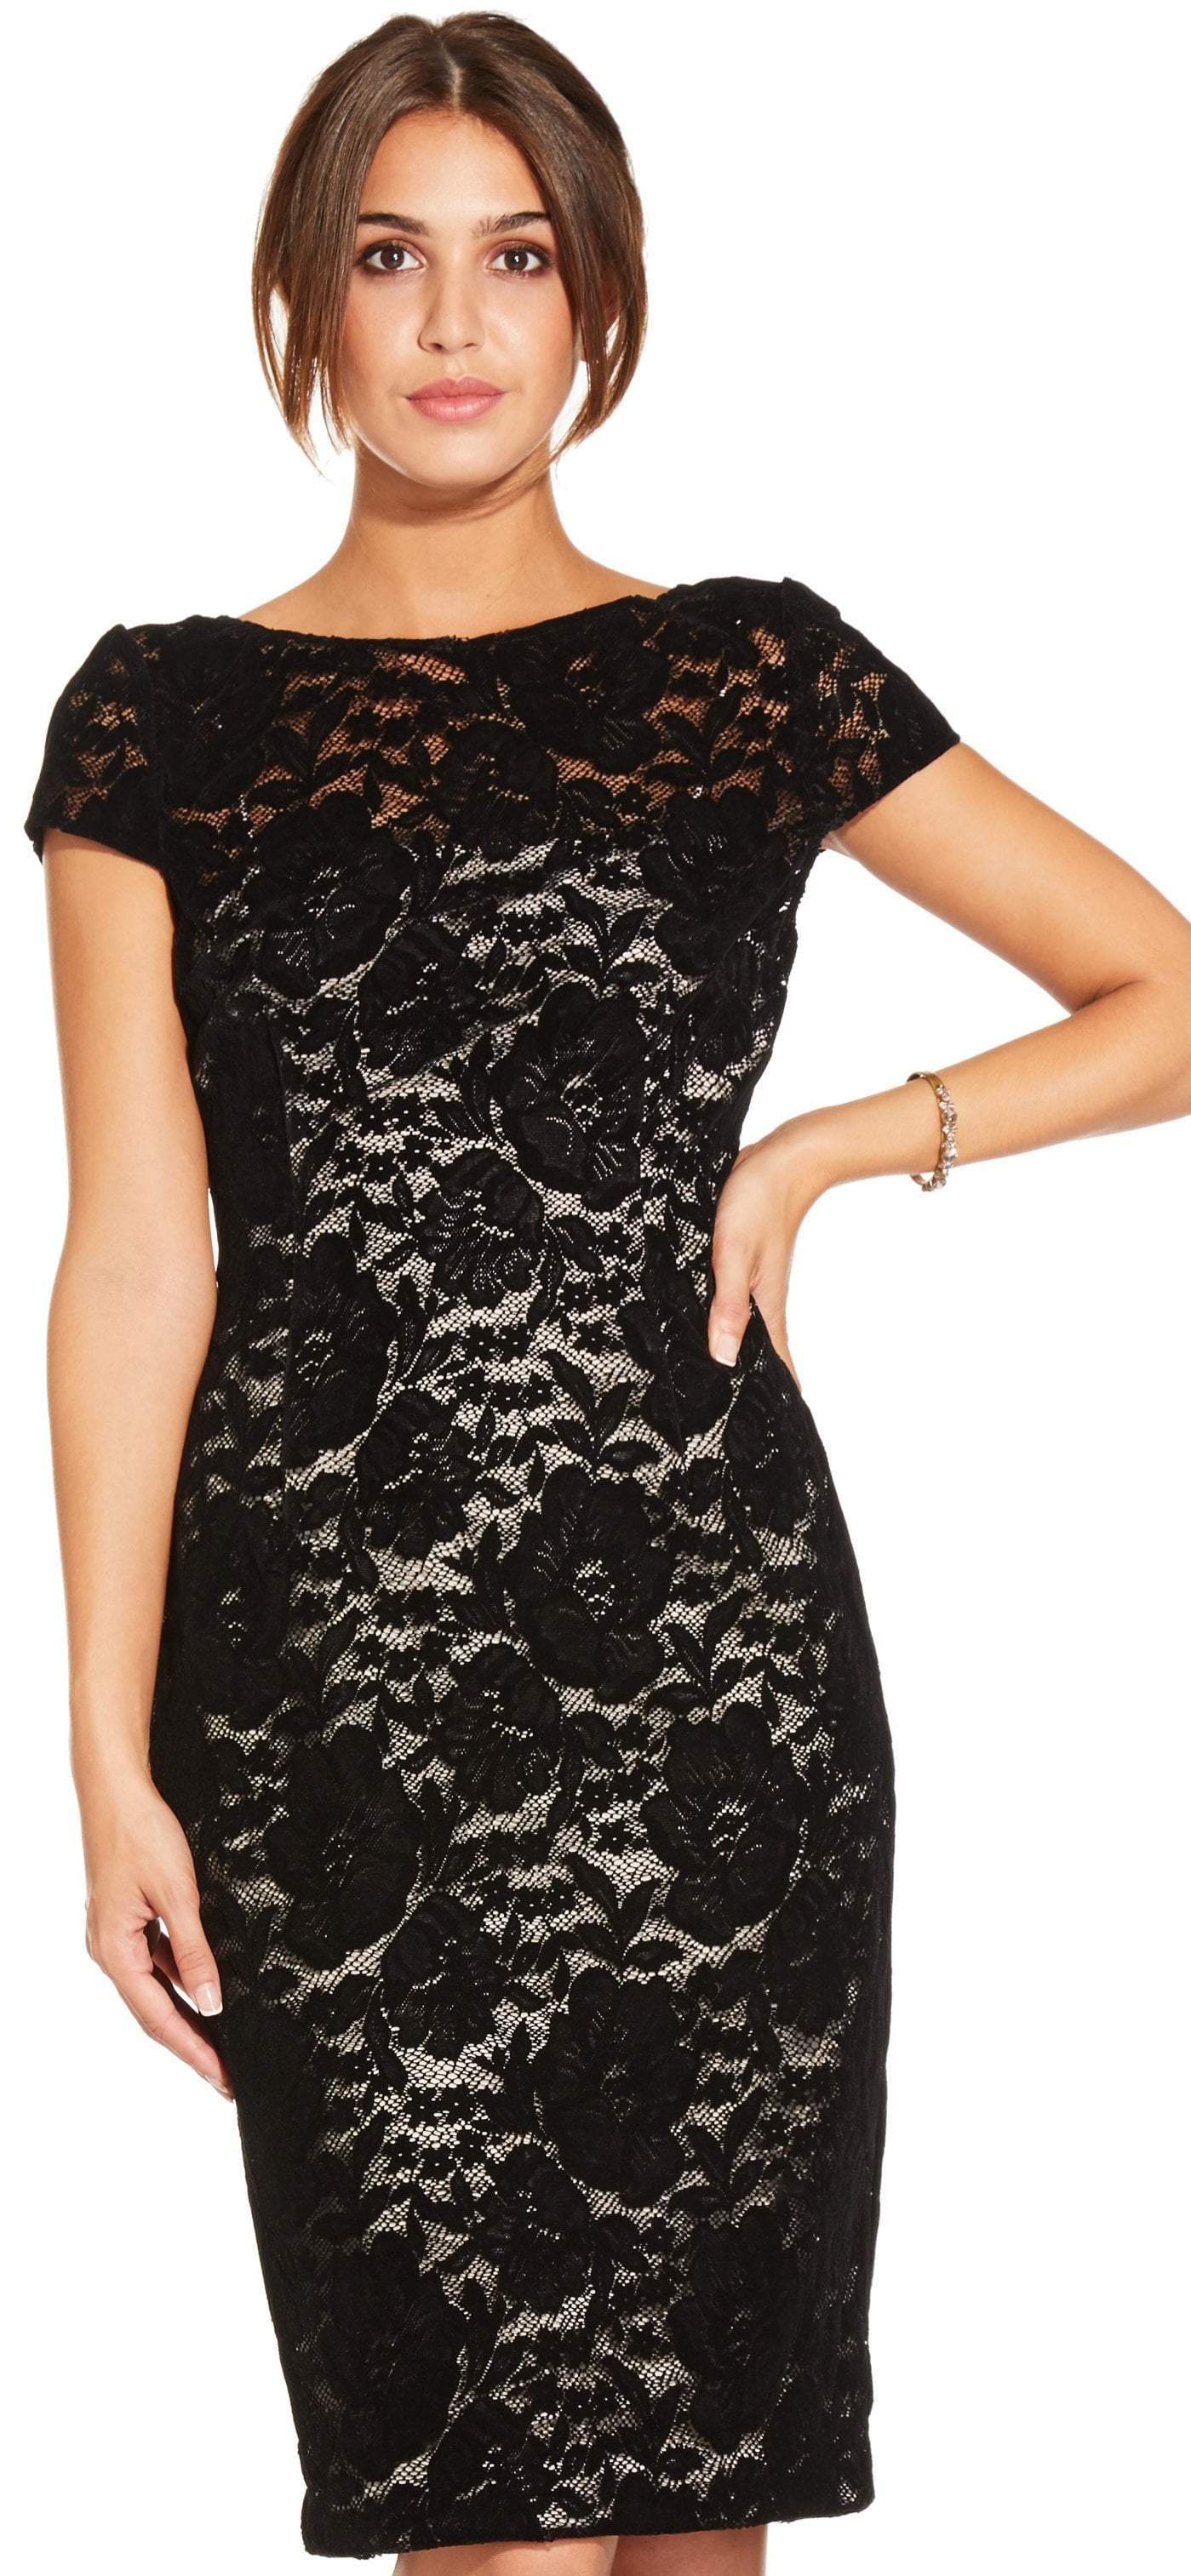 Image of Adrianna Papell - AP1E204098 Floral Lace Cap Sleeve Sheath Dress